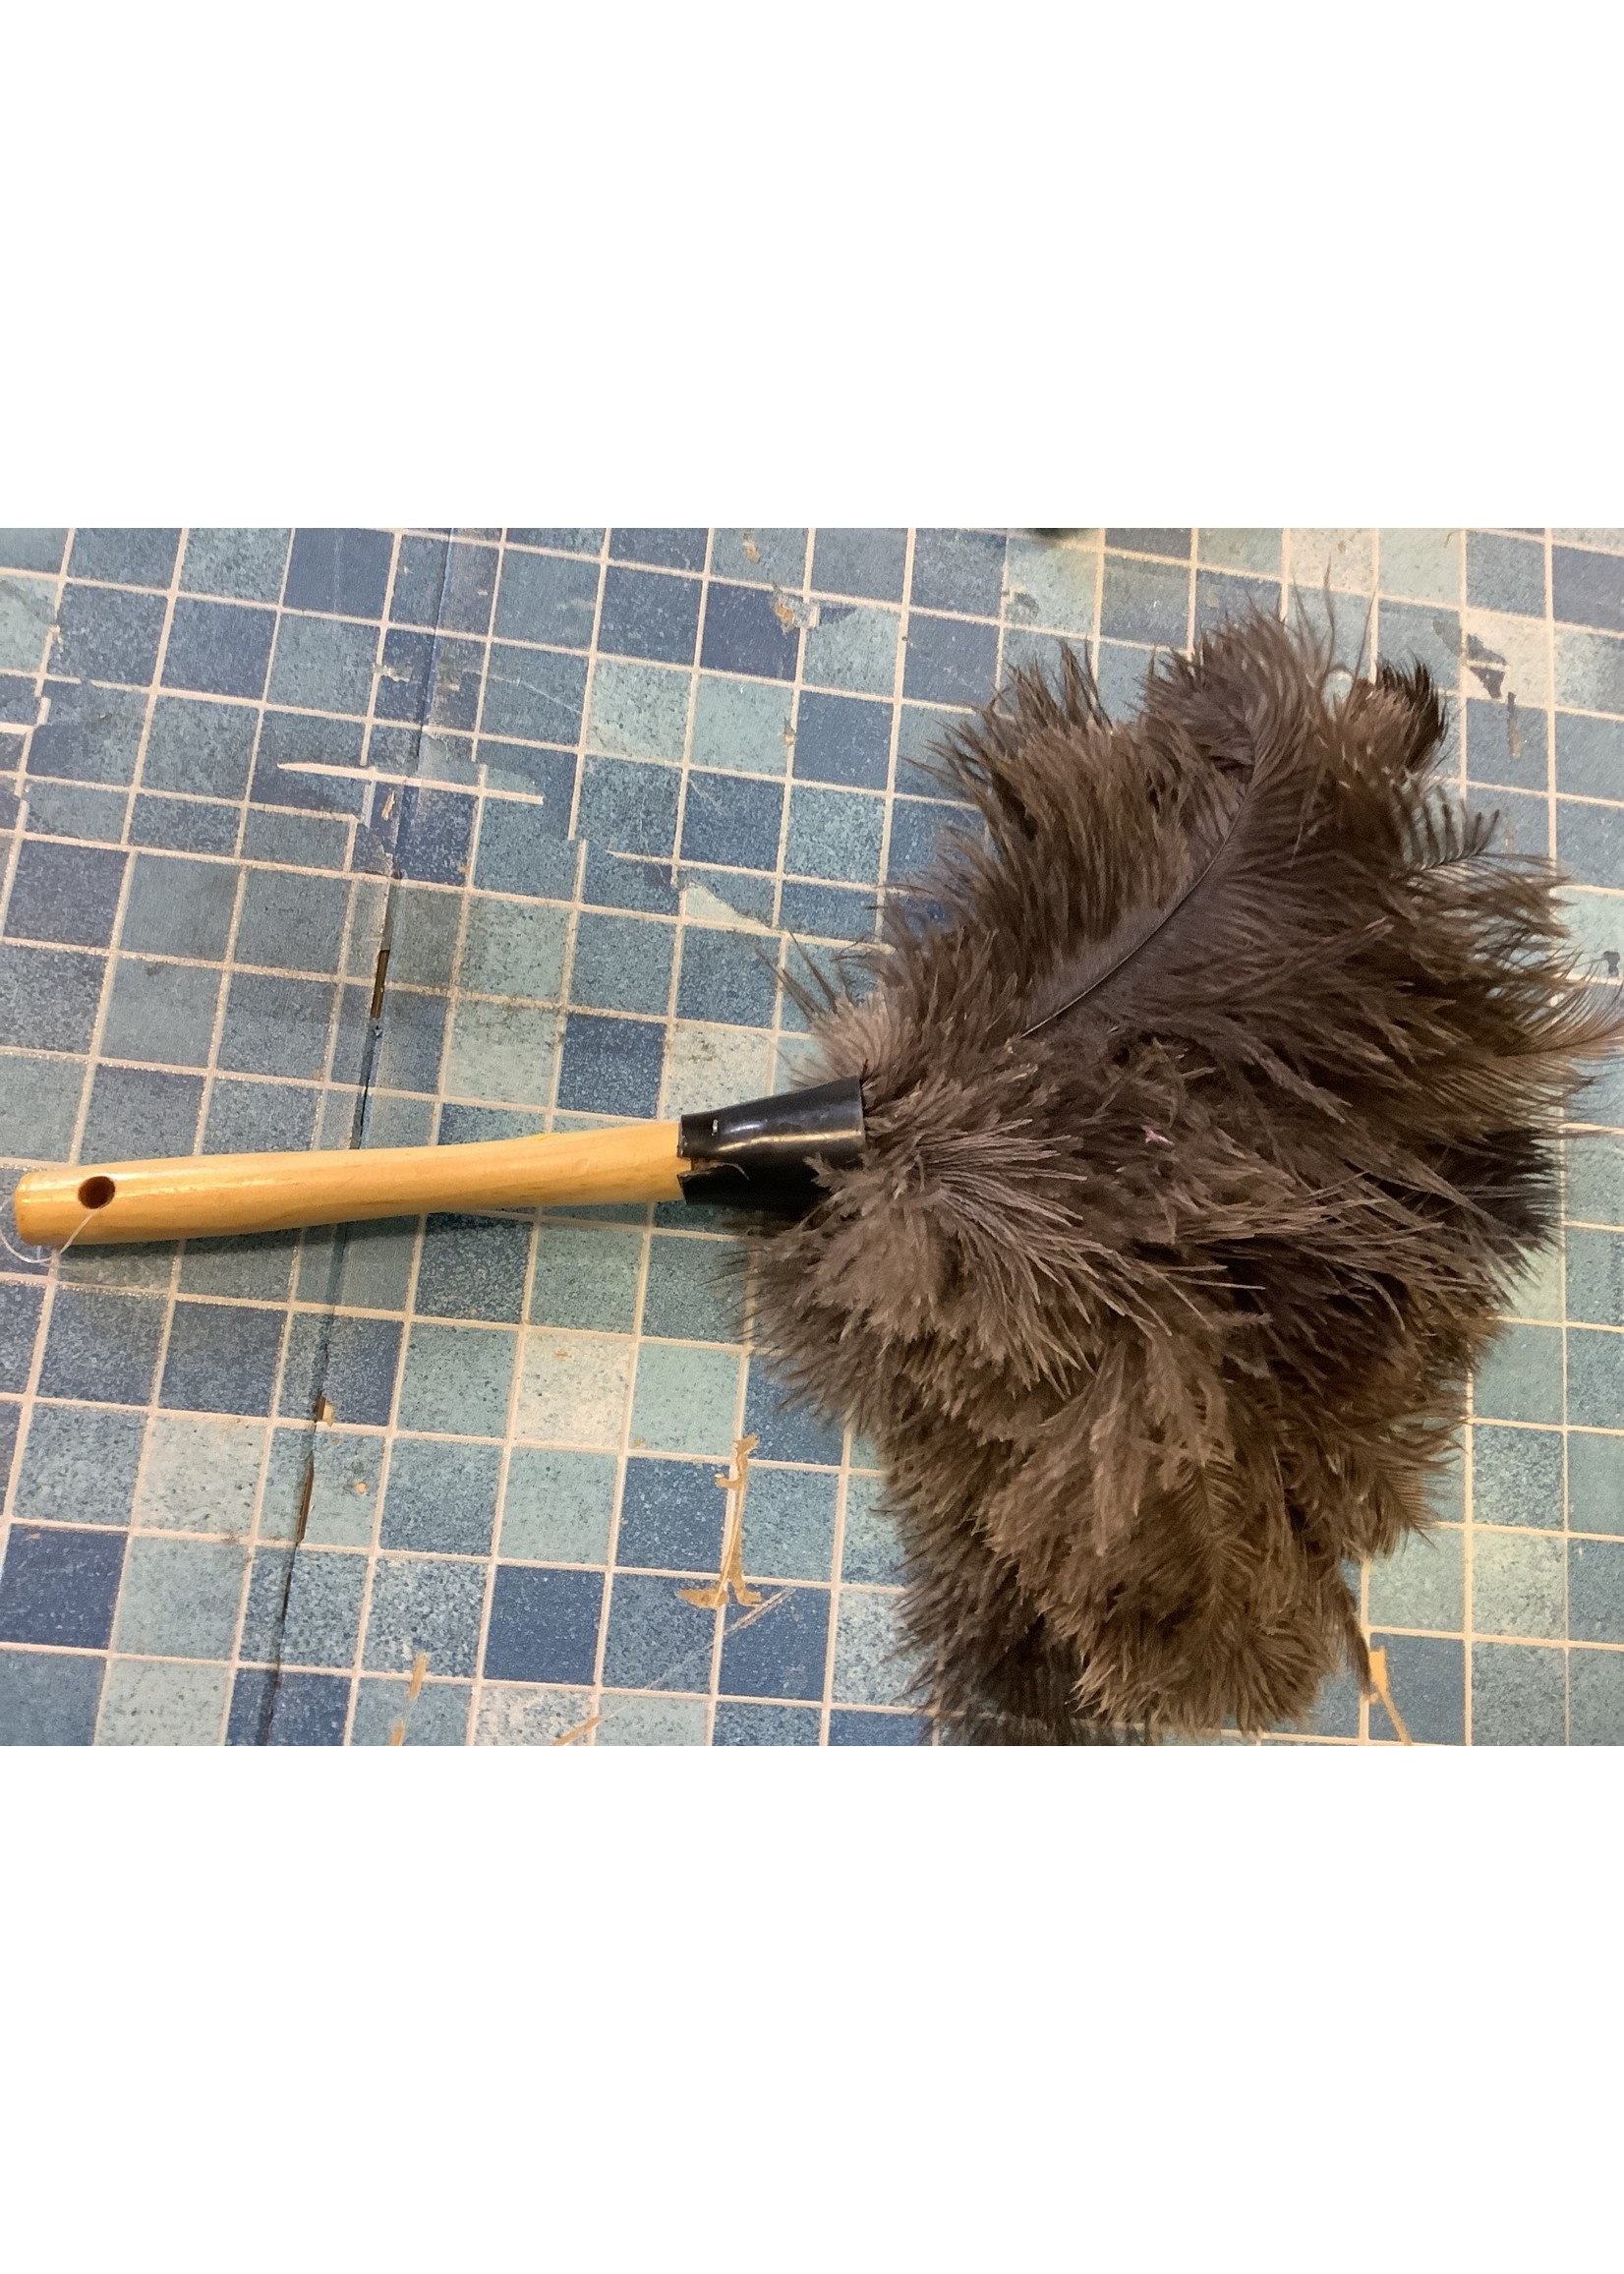 *Small Crack* Feather Duster